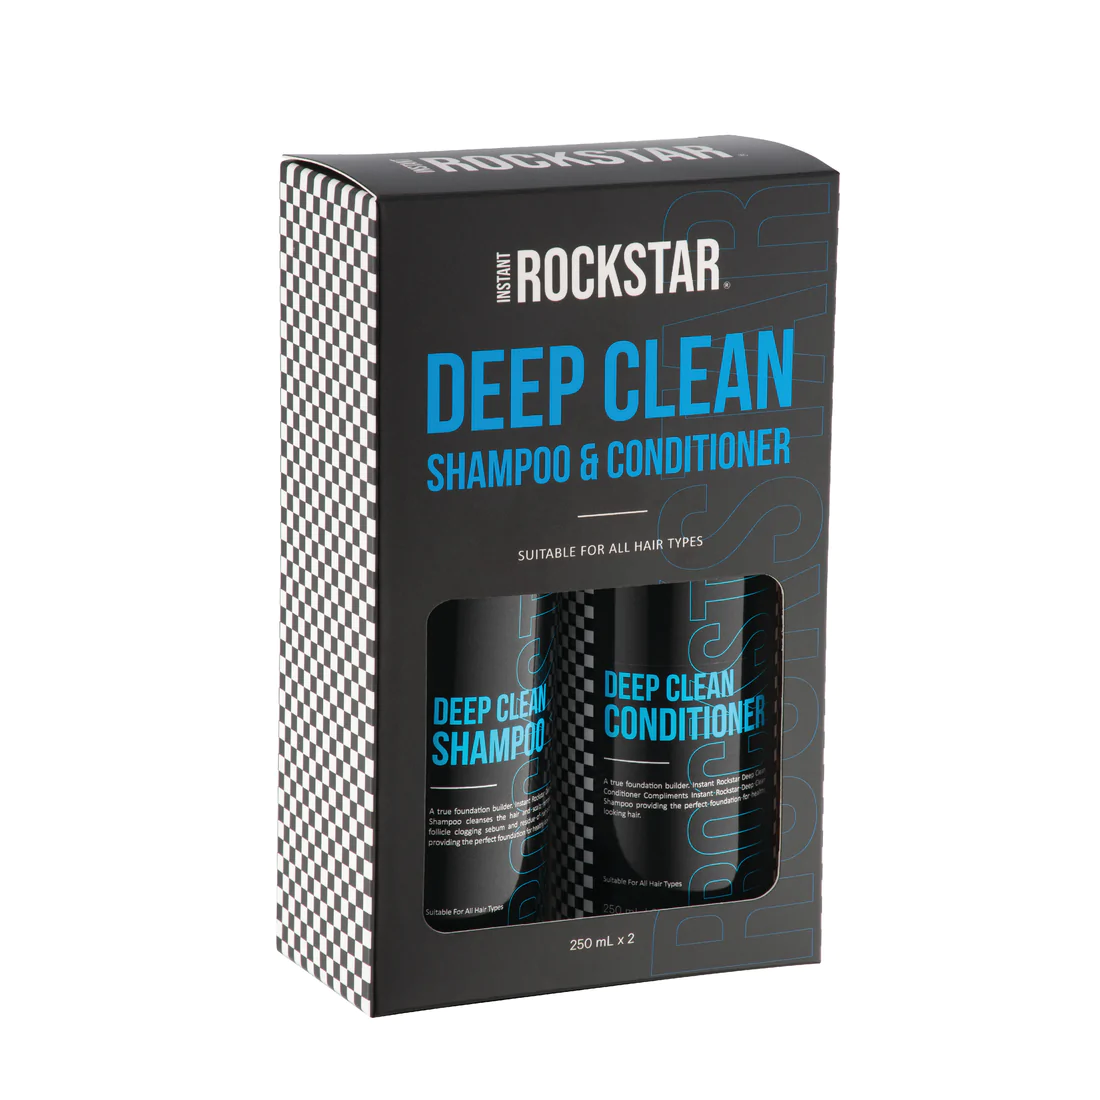 Instant Rockstar Deep Clean Shampoo And Conditioner Duo Pack - 250ml